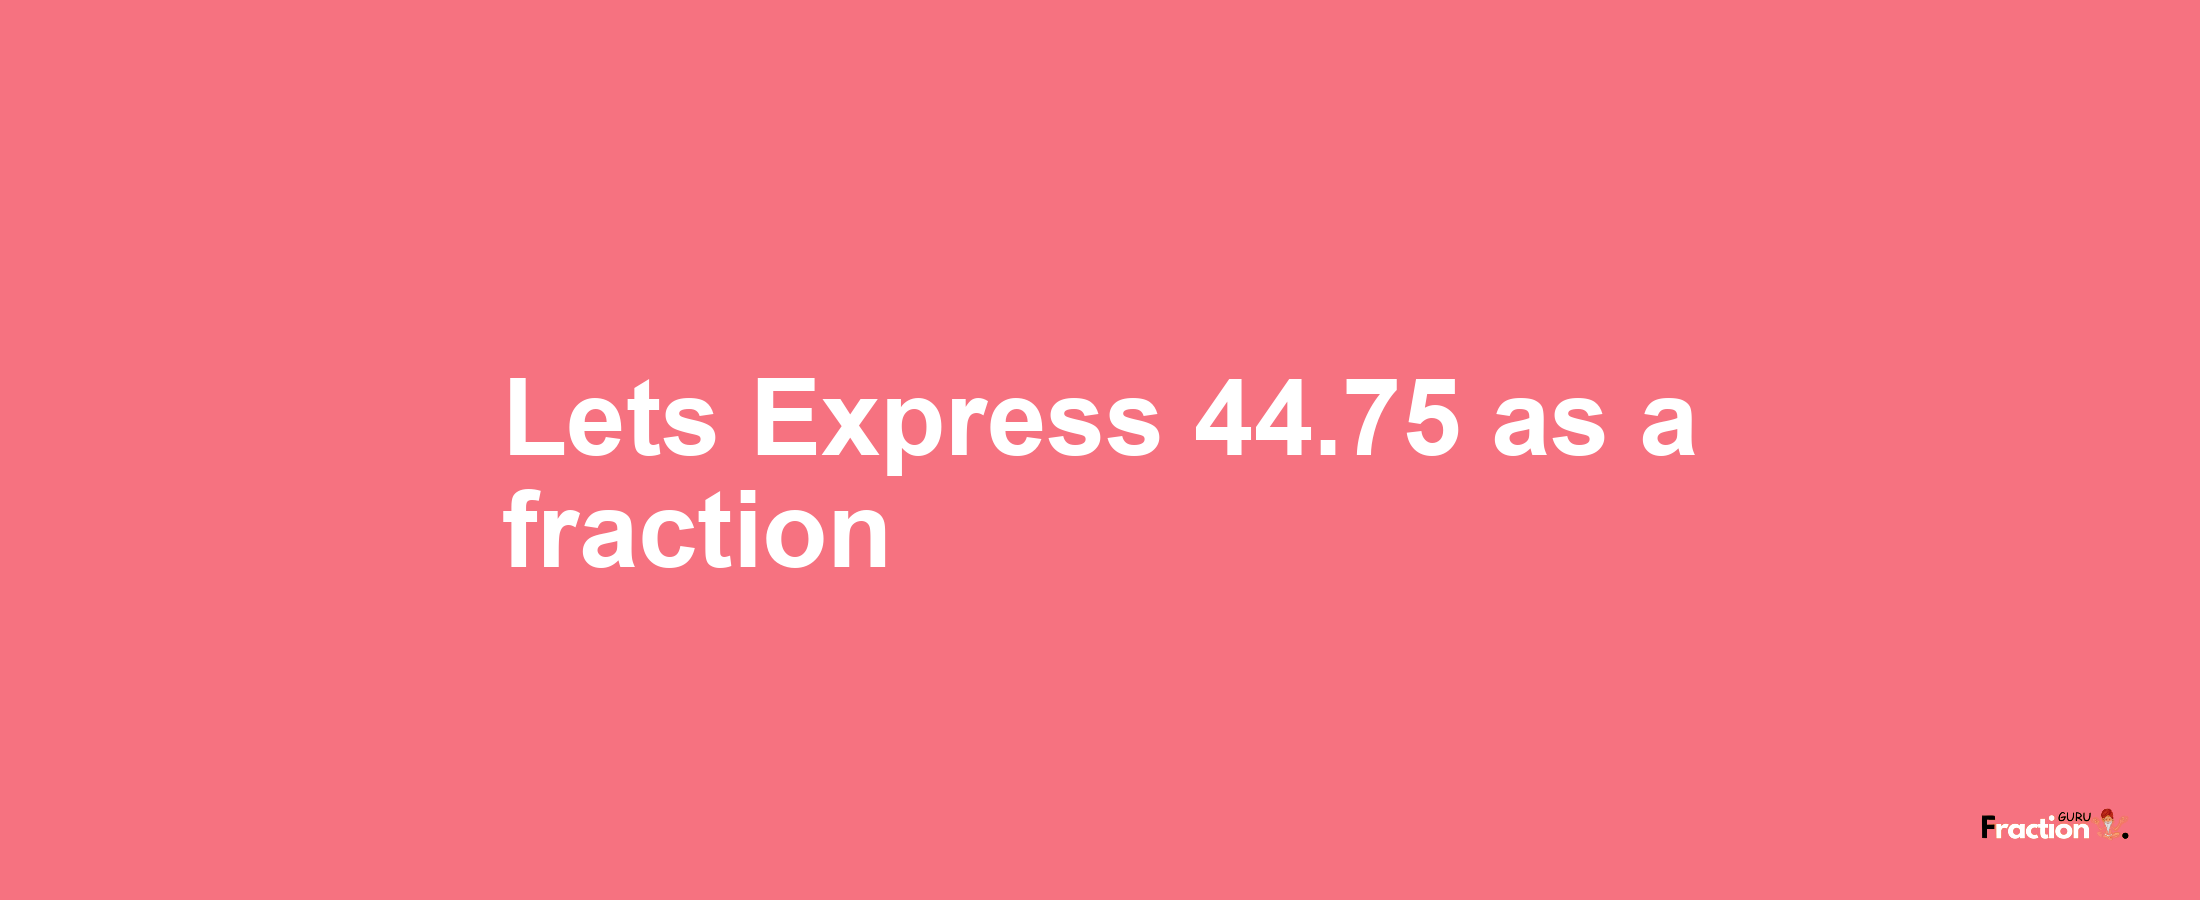 Lets Express 44.75 as afraction